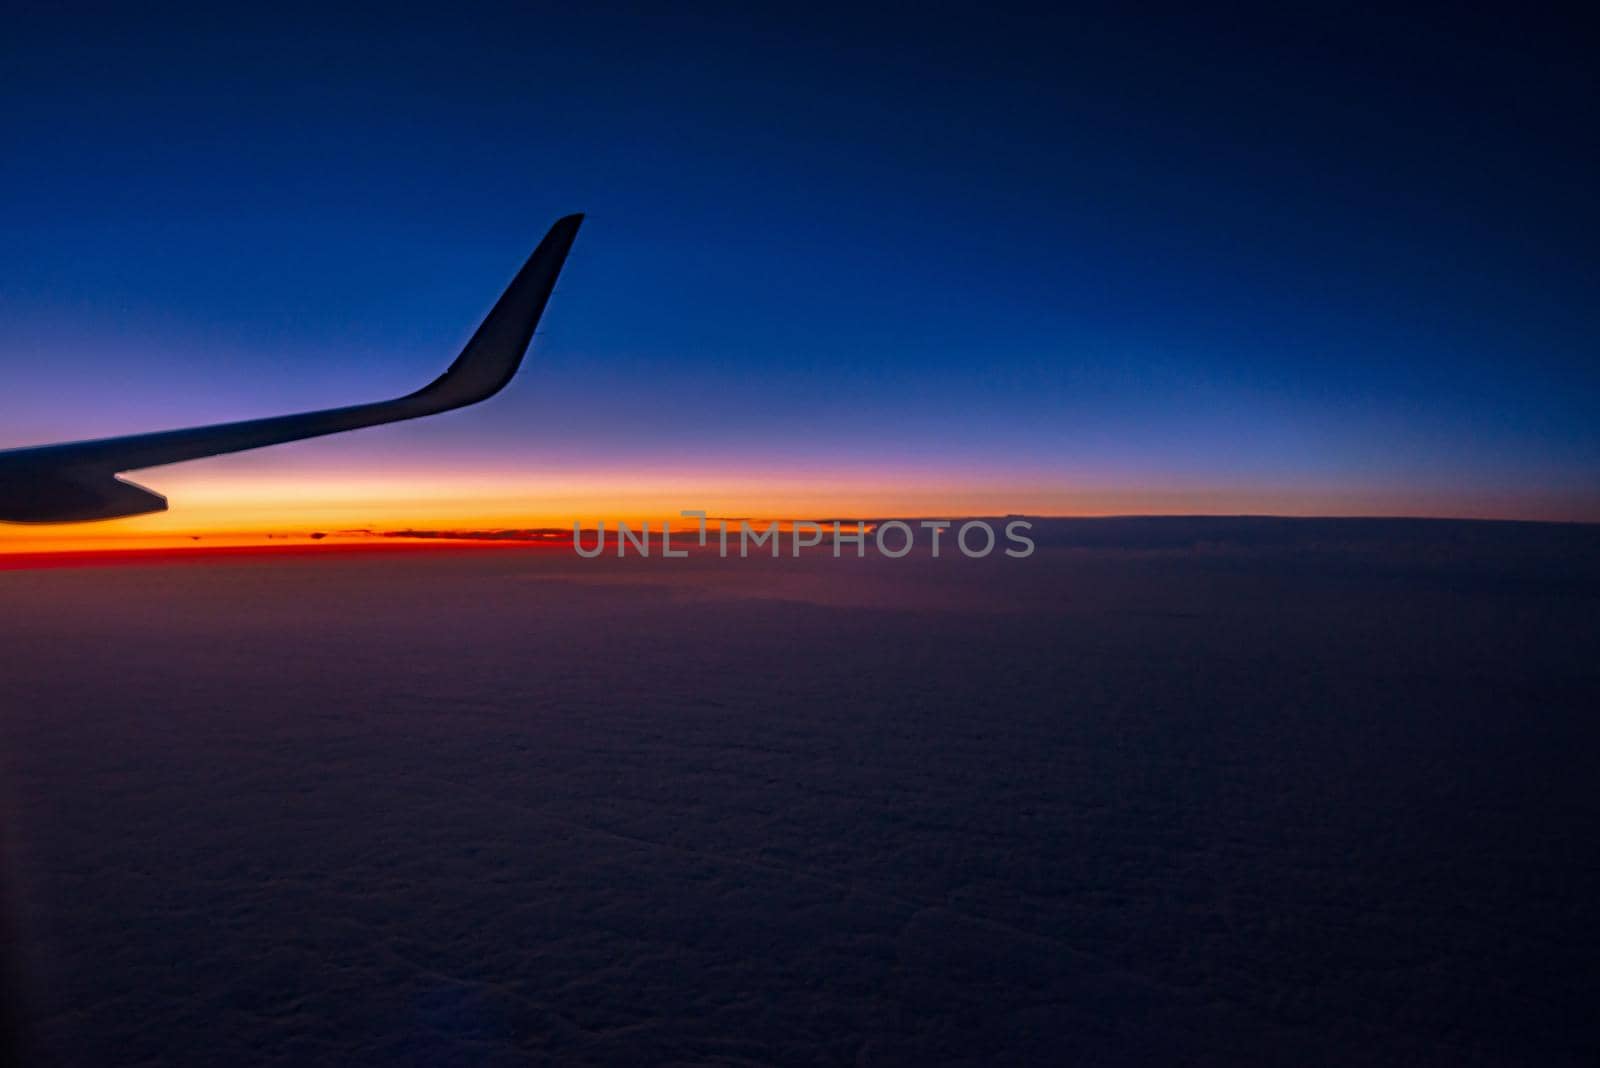 View from the plane on a beautiful orange sunset by digidreamgrafix